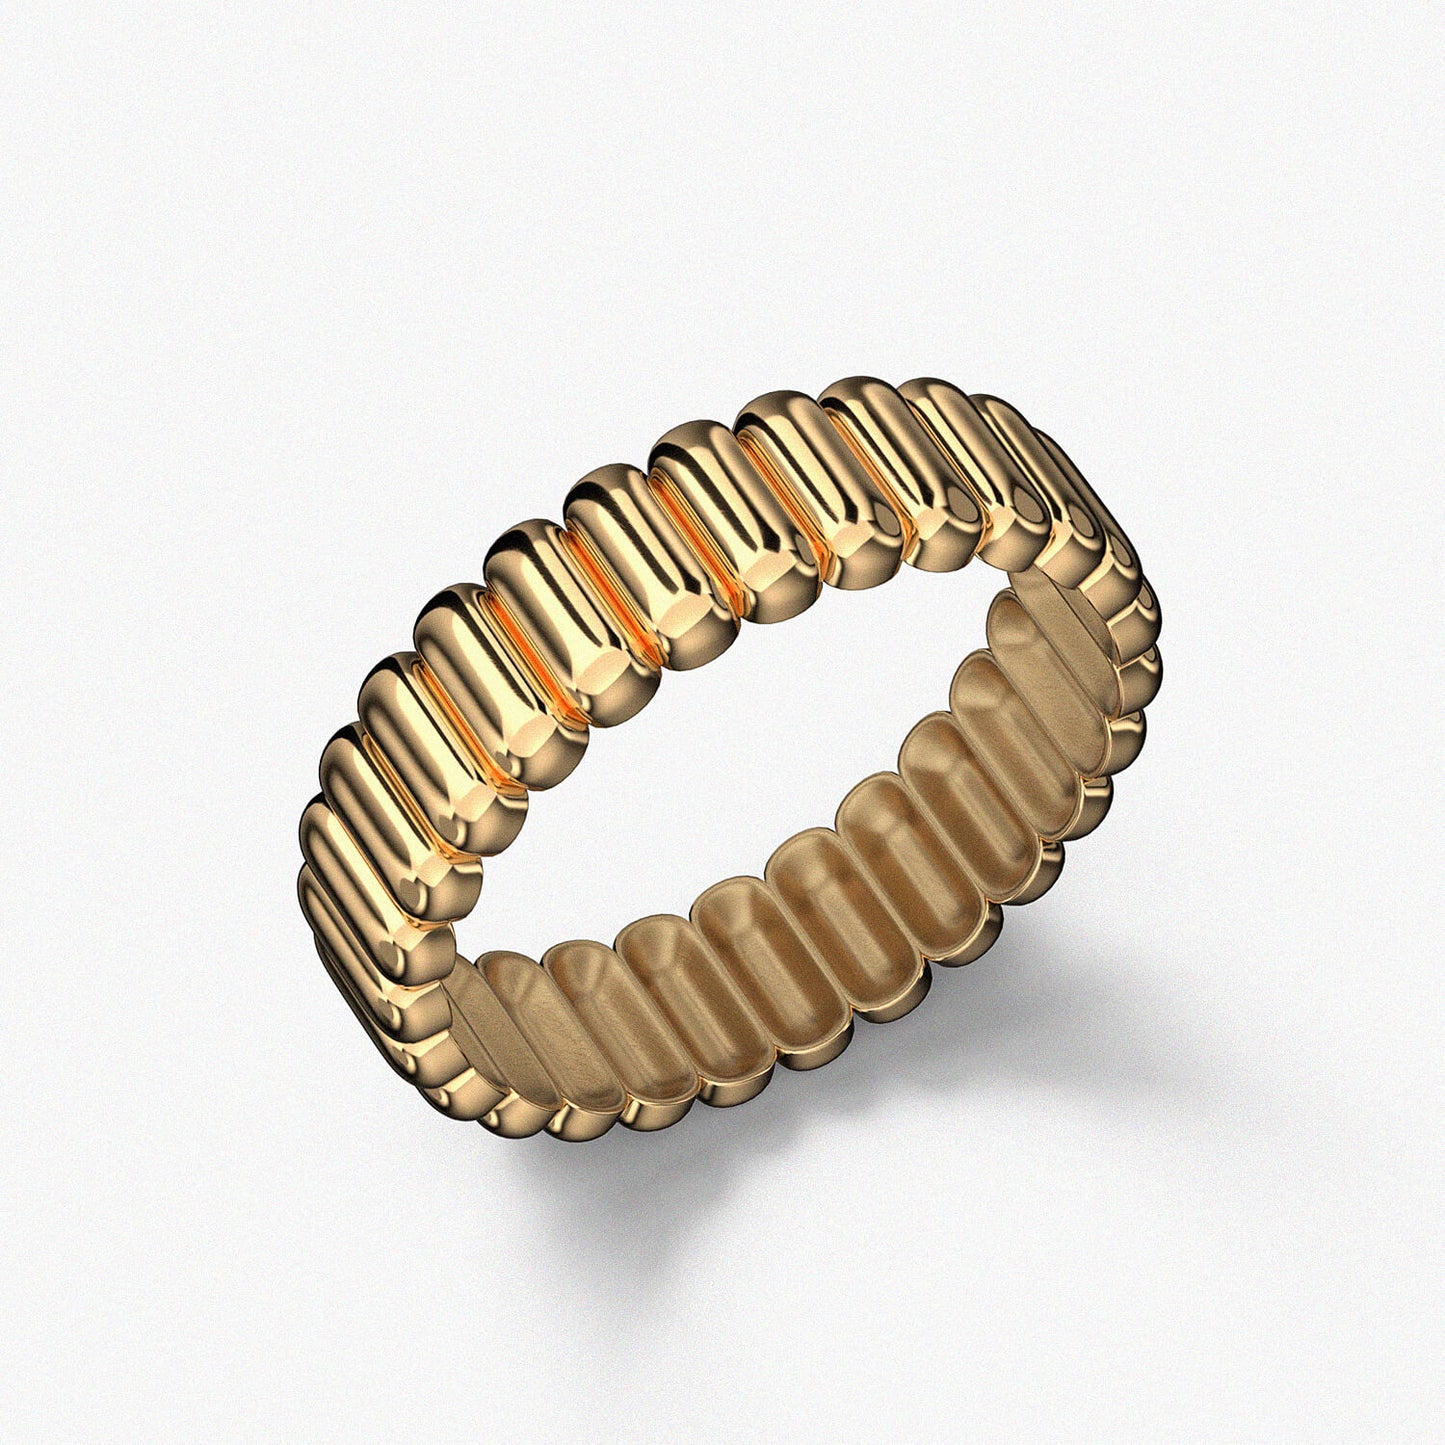 Baguette Stacking Ring